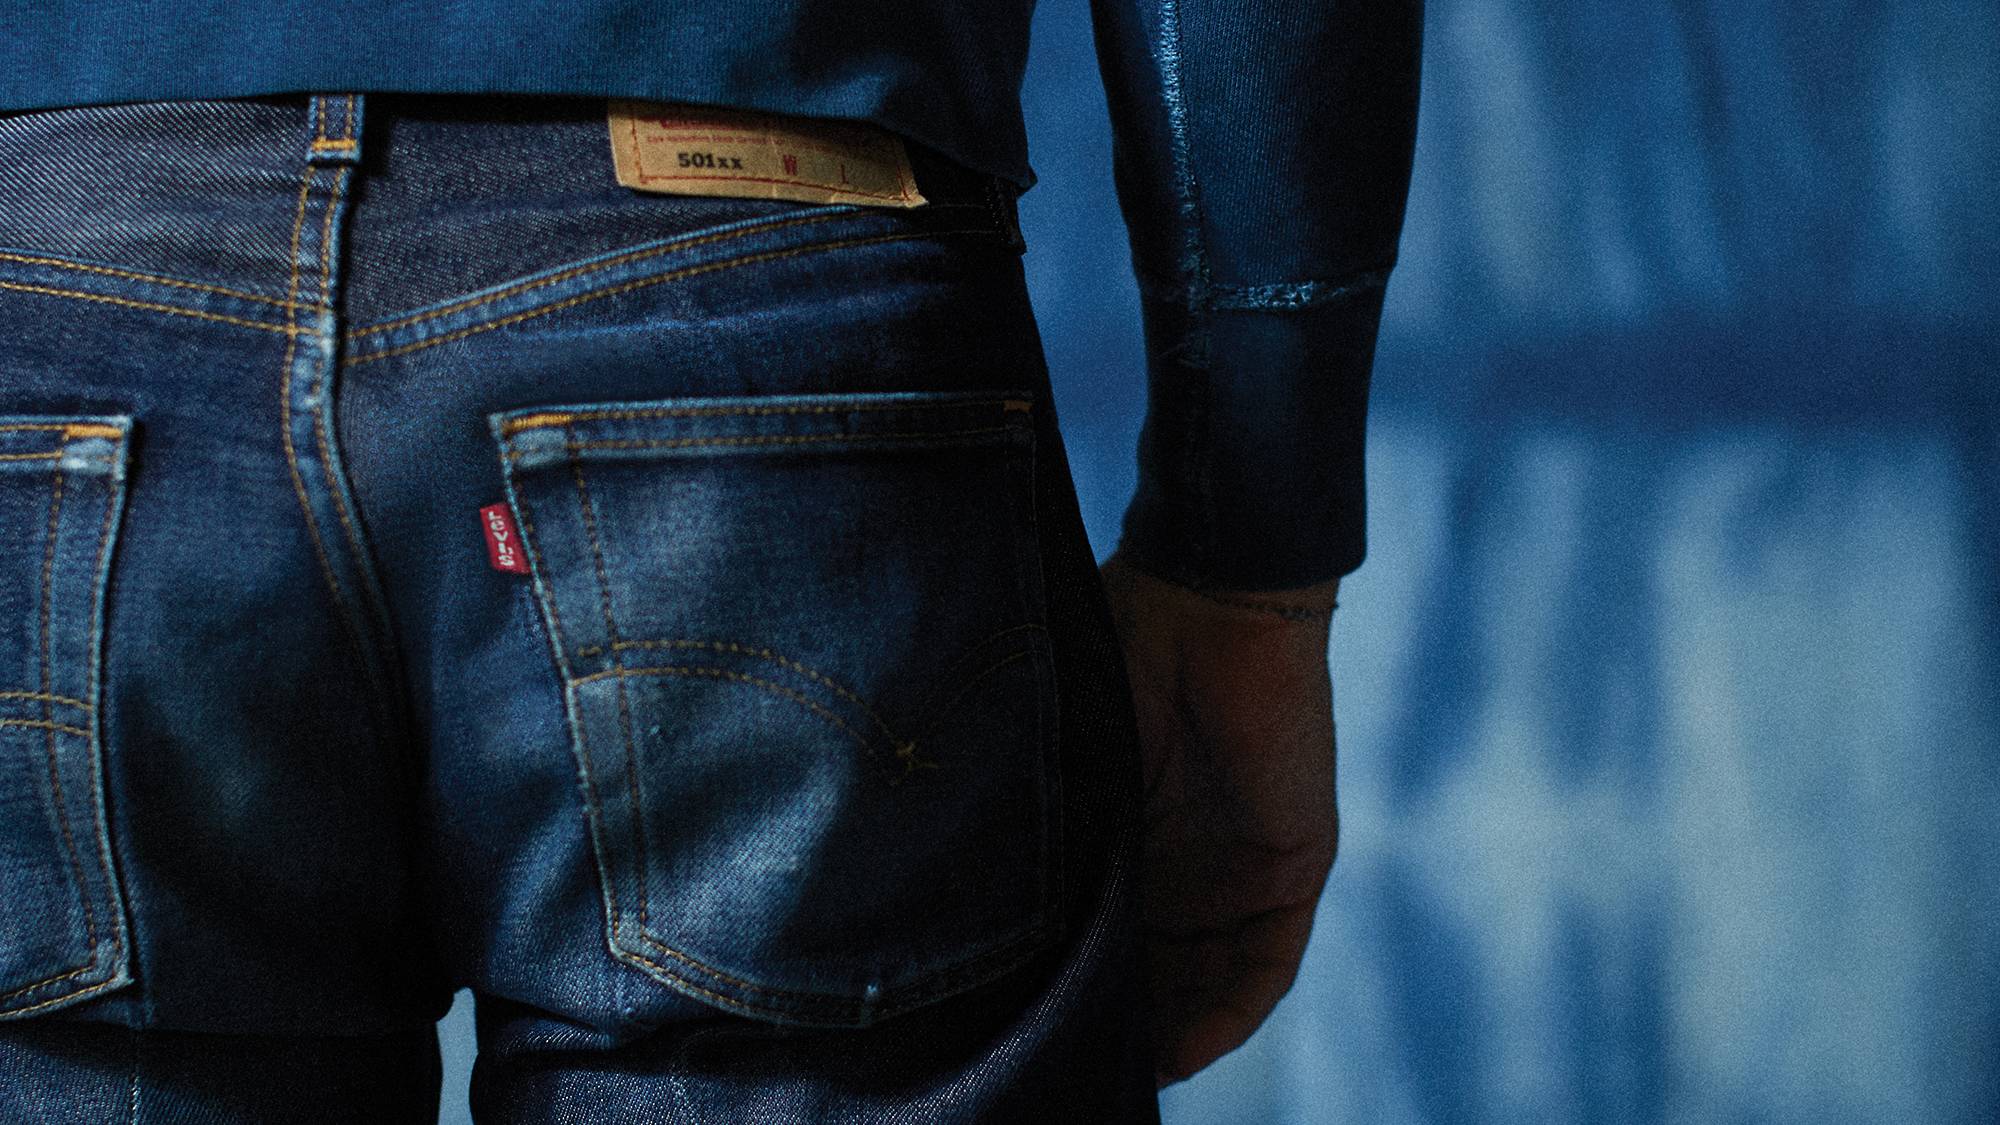 The Official Levi's Style Guide to 500 Jeans